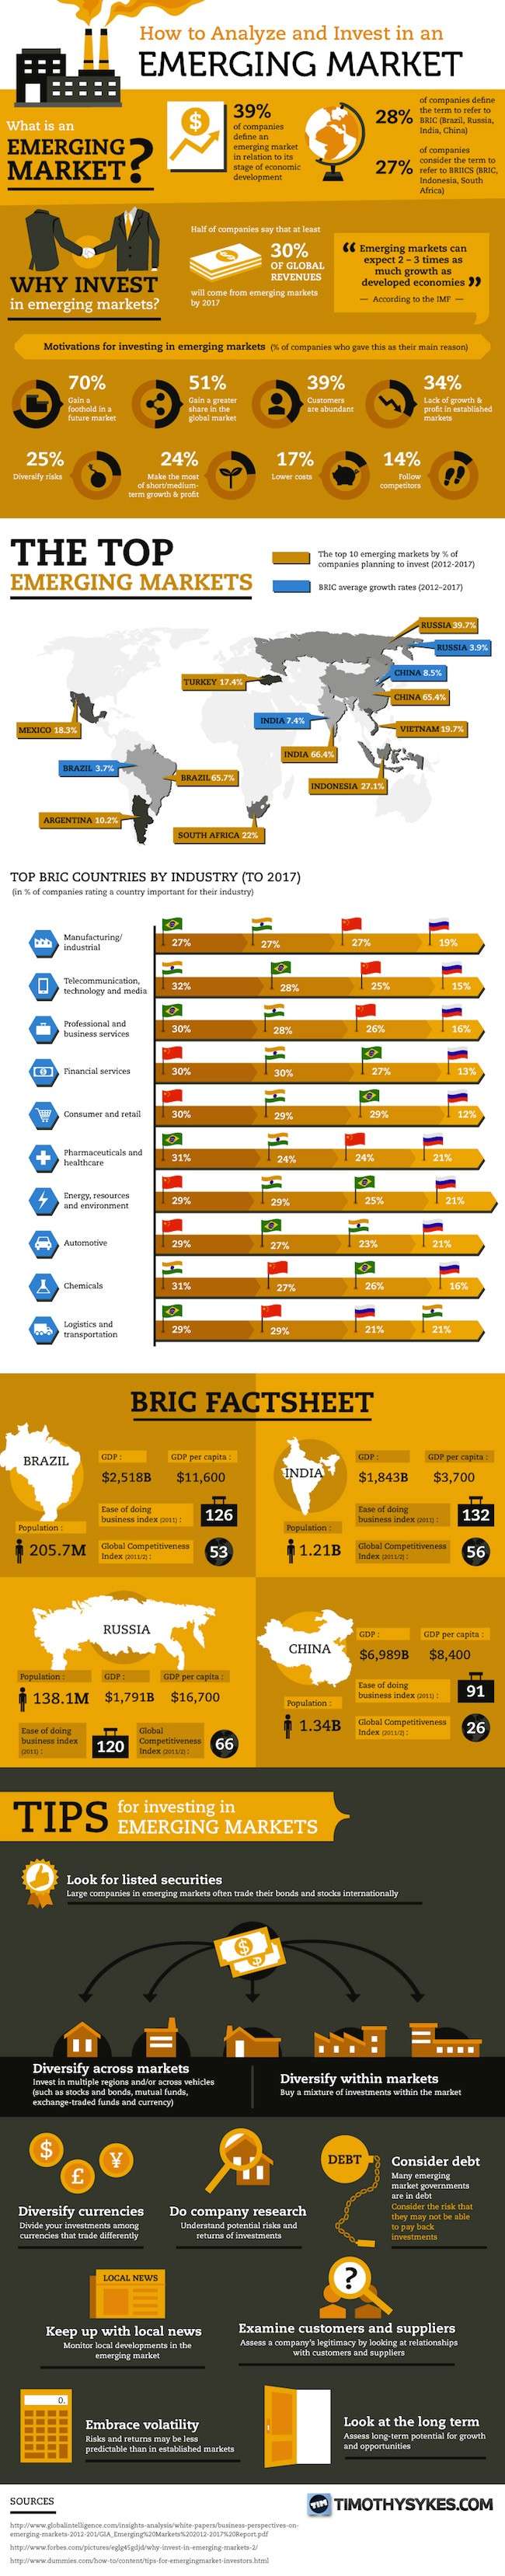 Tips for Investing in Emerging Markets (Infographic)  Tips-i10